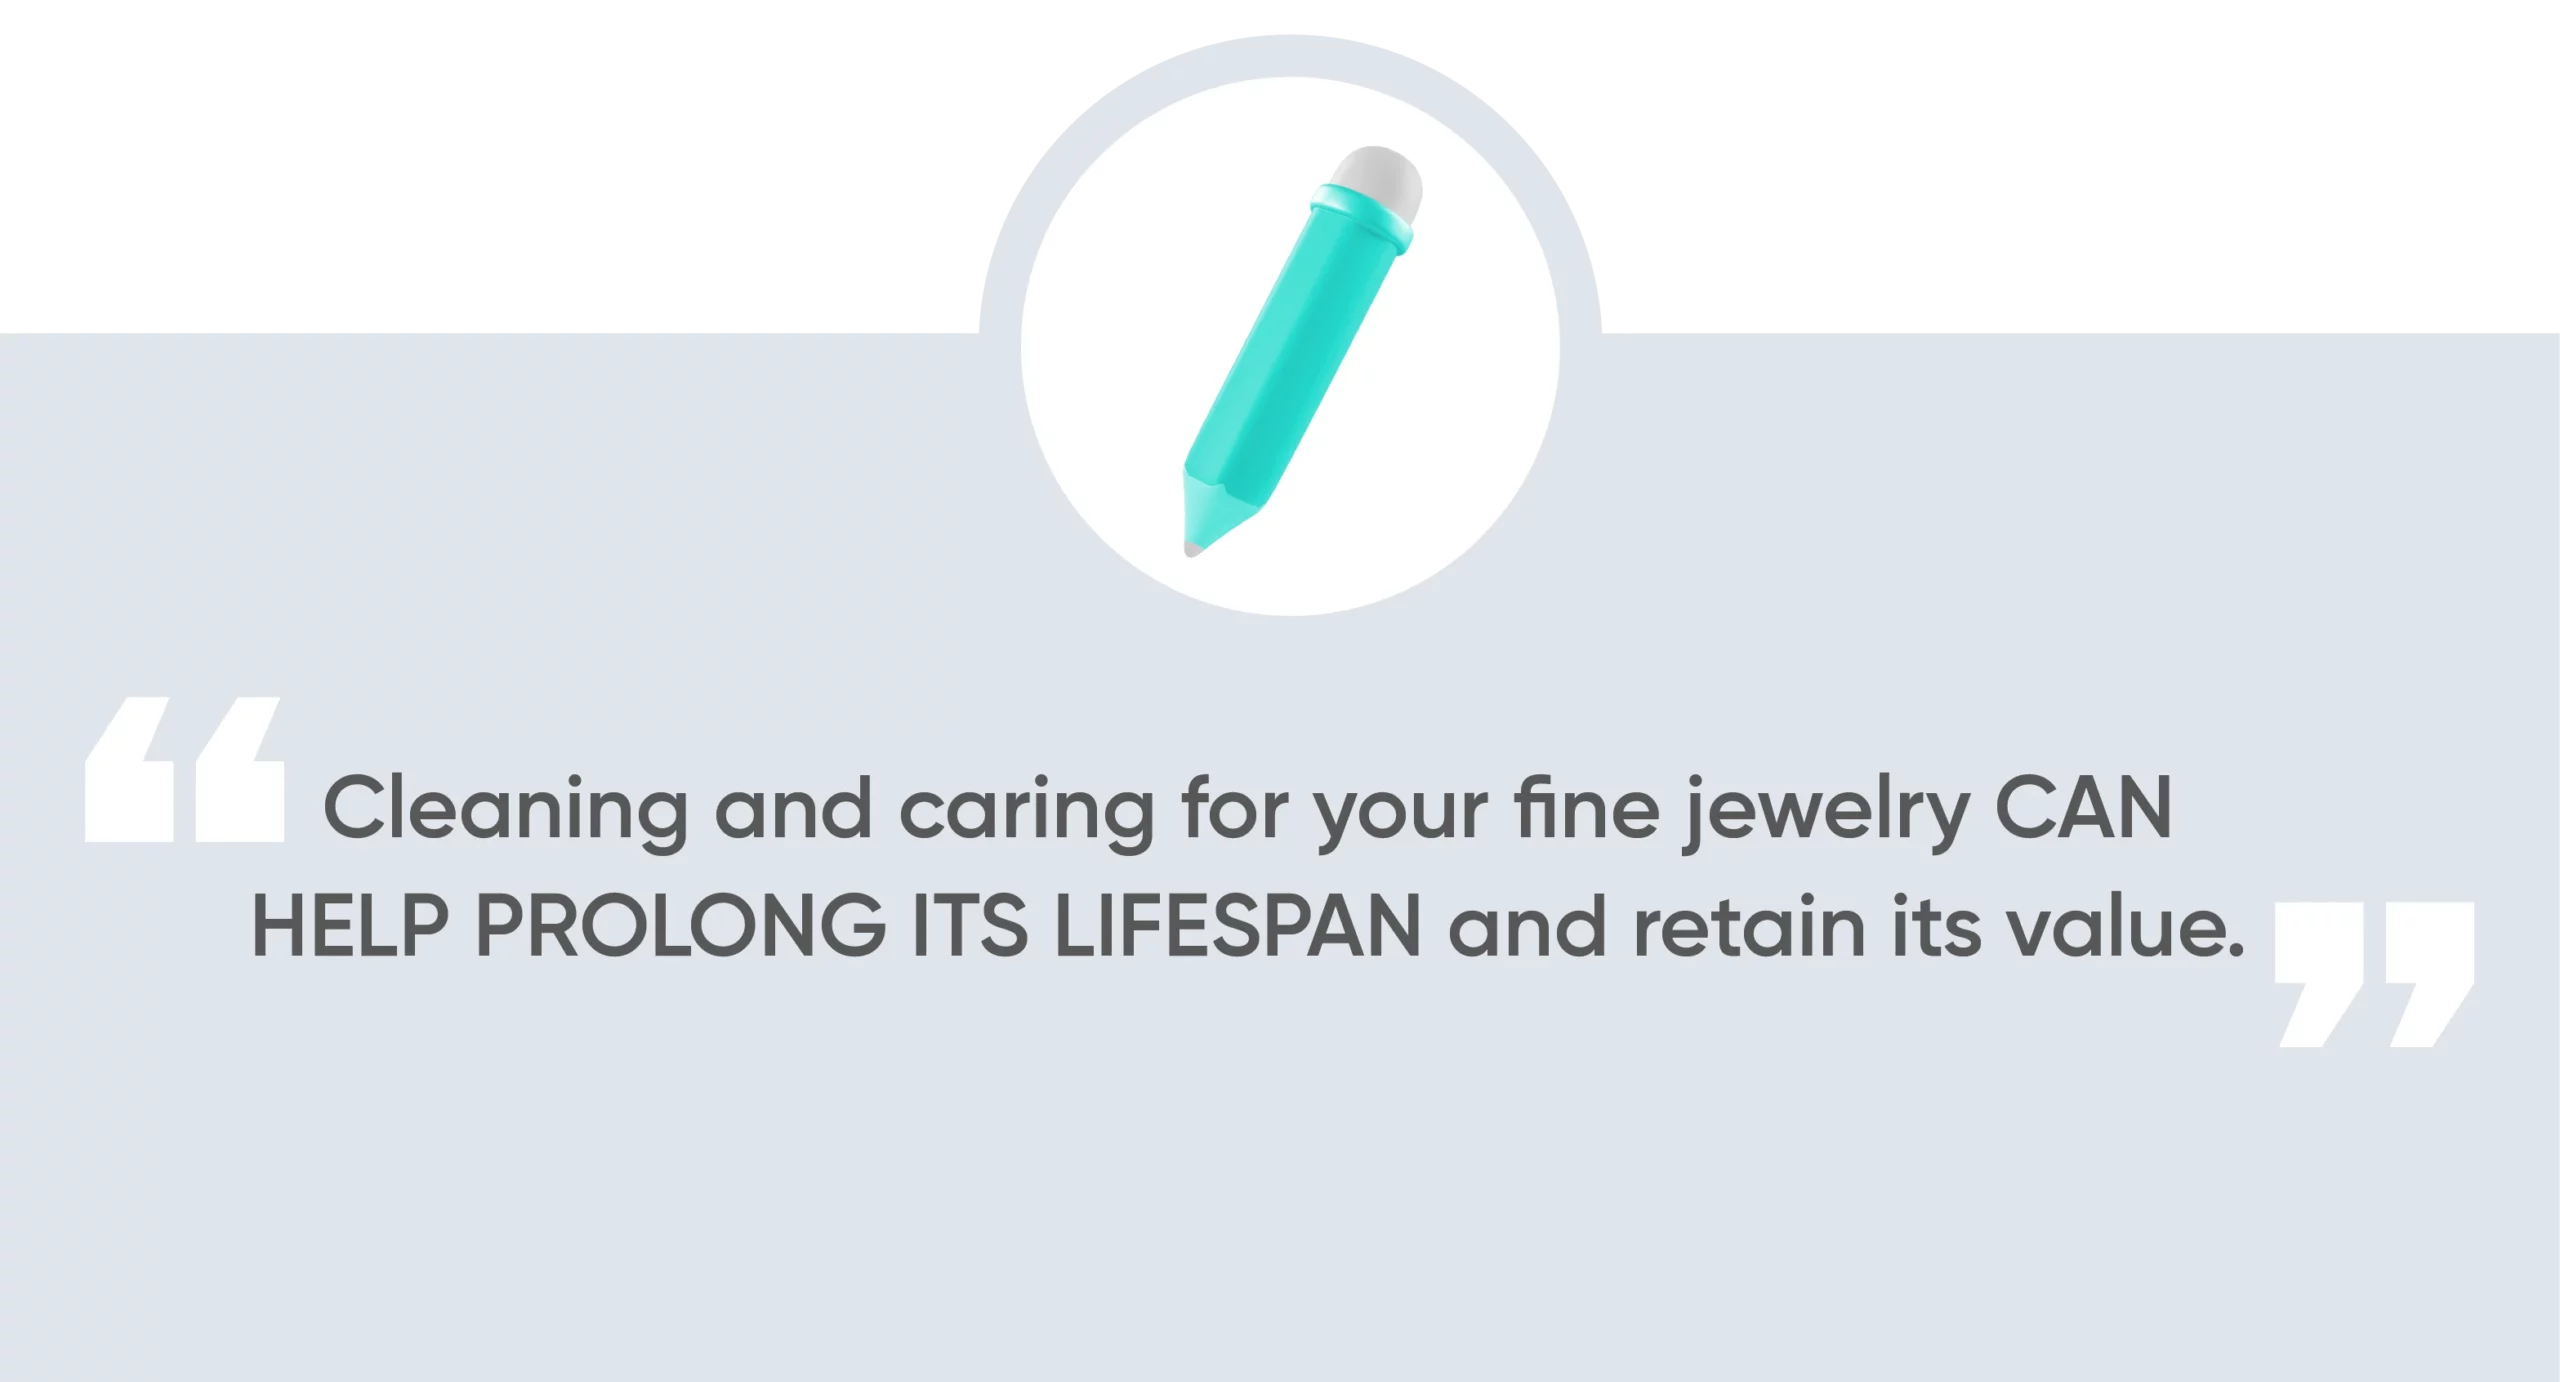 Cleaning and caring for your fine jewelry can help prolong its lifespan and retain its value.